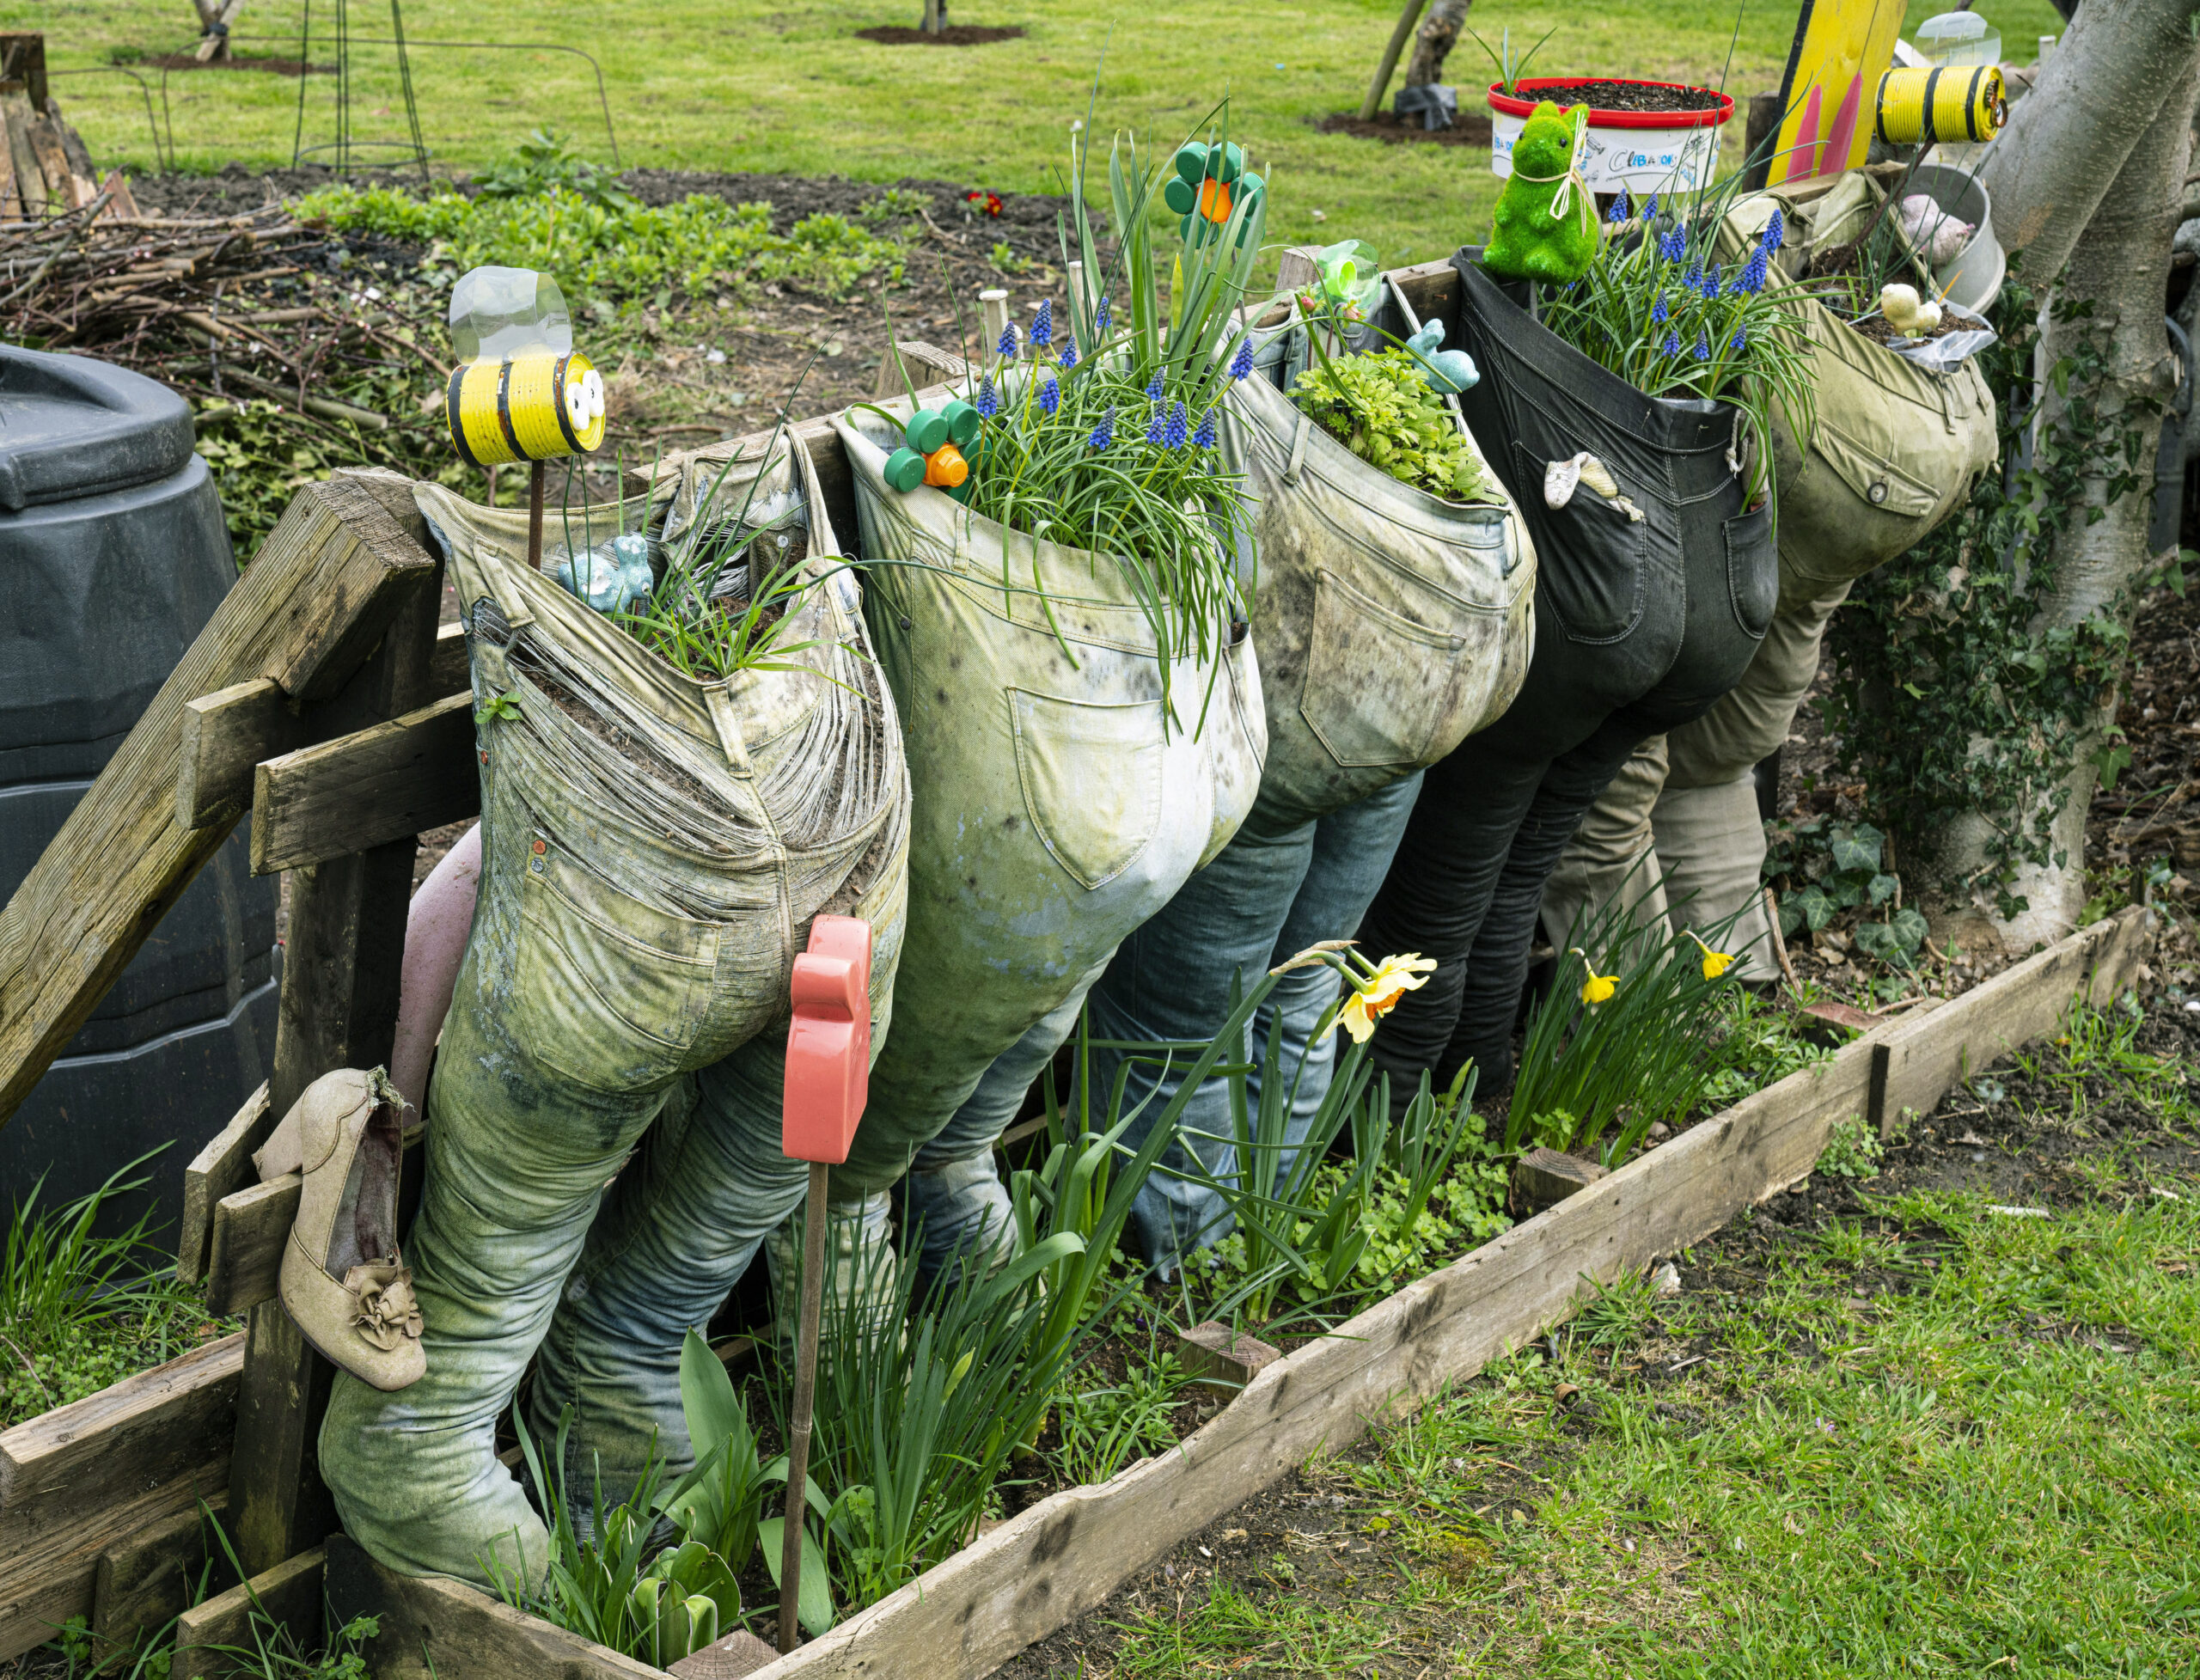 Old trousers recycled as growbags for herbs